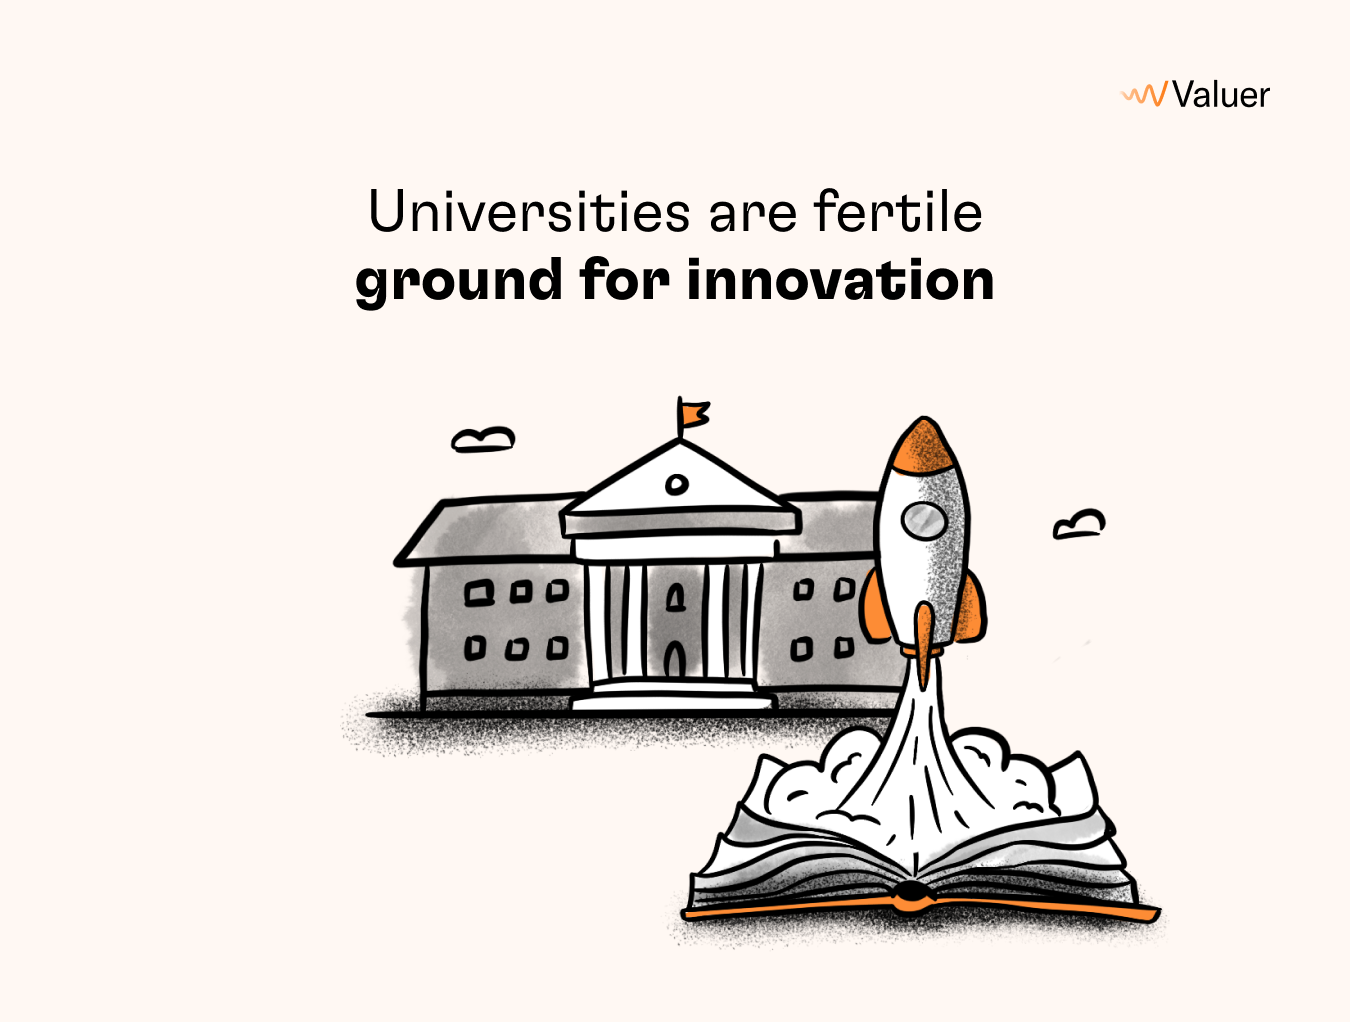 Universities are fertile ground for innovation